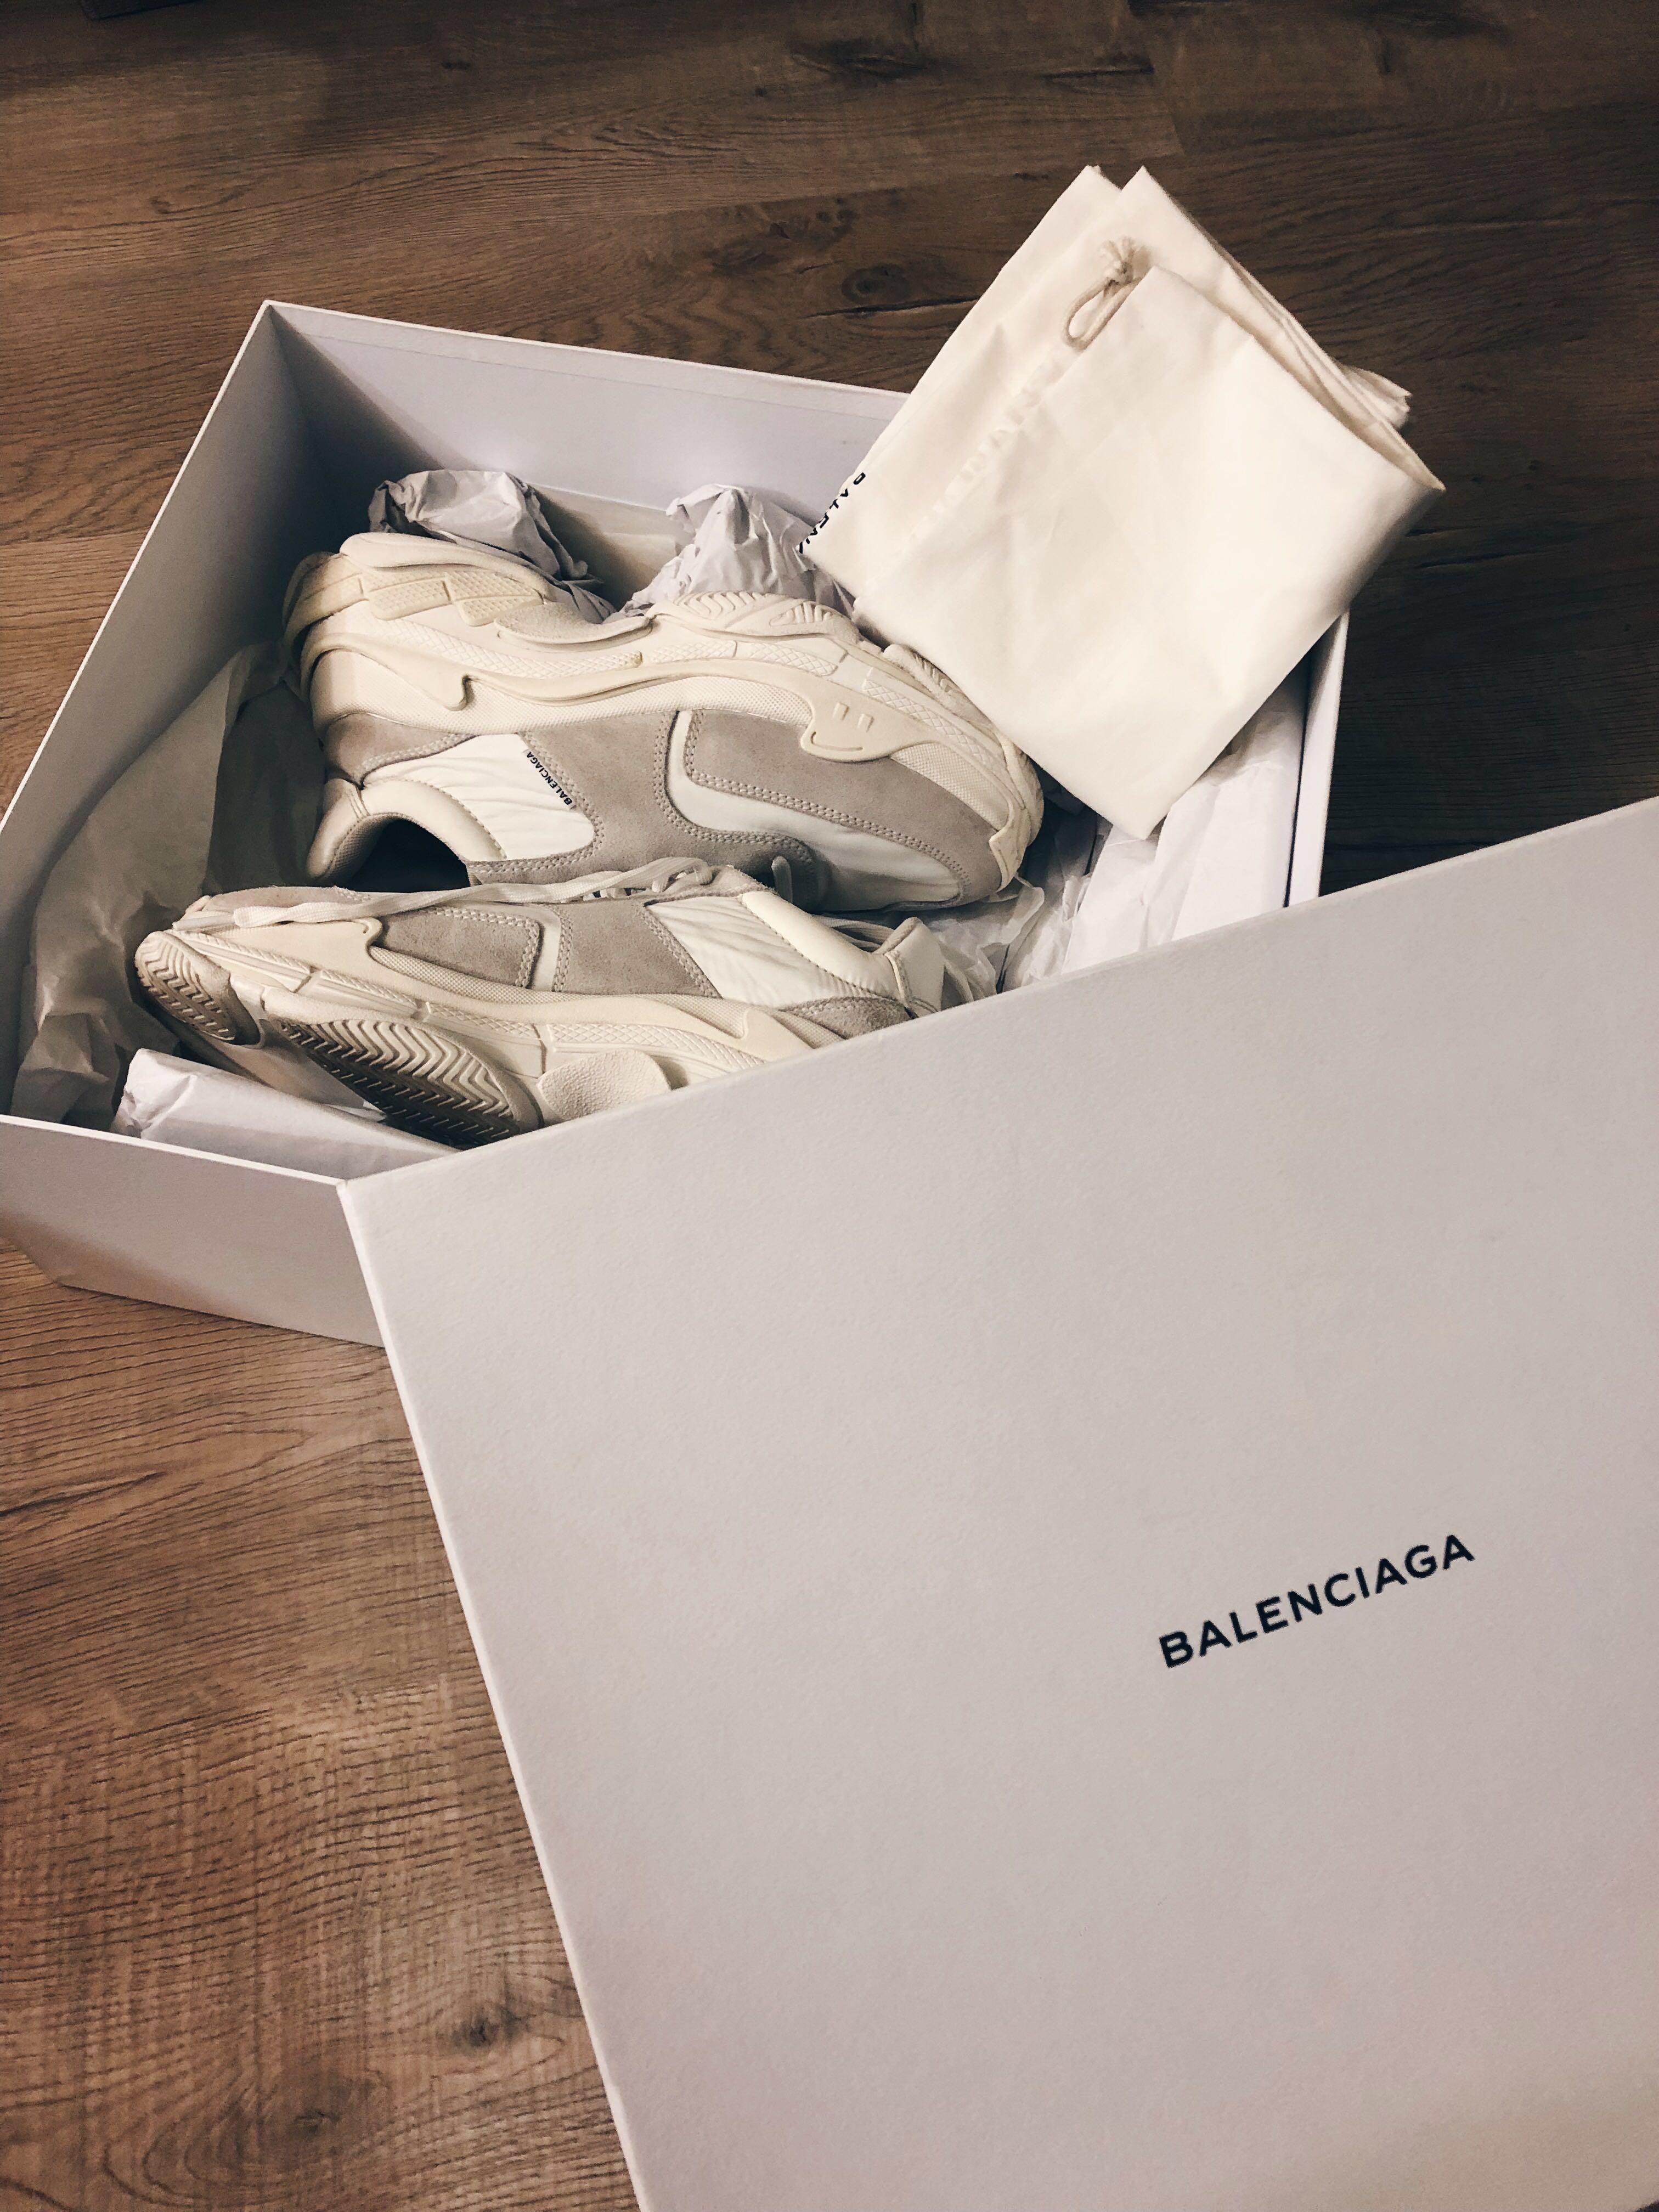 For sale Balenciaga Speed Trainer triple white Size 43 fit